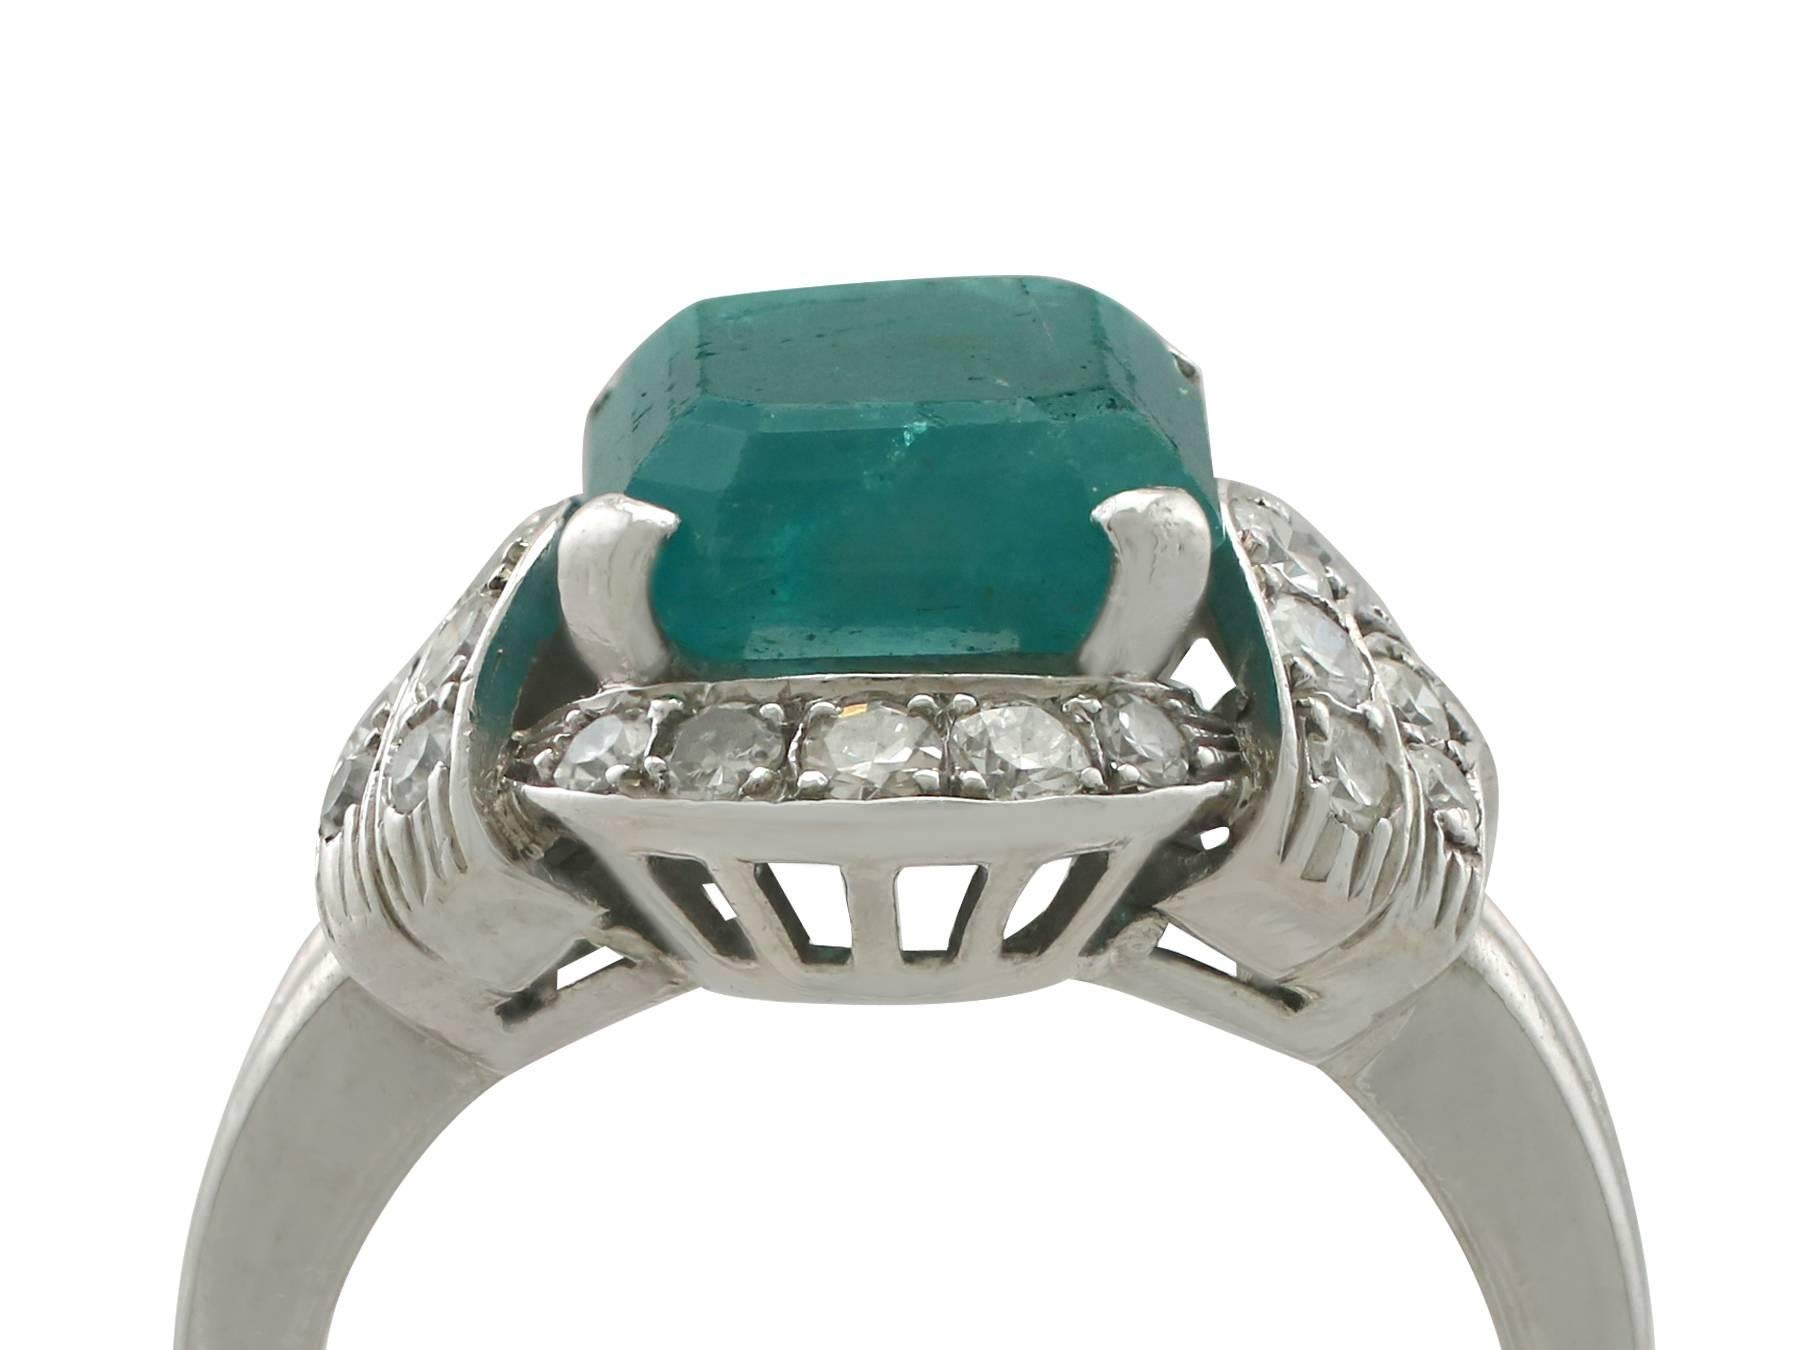 A fine and impressive vintage Art Deco style 3.75 carat emerald and 0.52 carat diamond, platinum cocktail ring; part of our diverse vintage jewellery collections.

This fine and impressive emerald cocktail ring has been crafted in platinum.

The